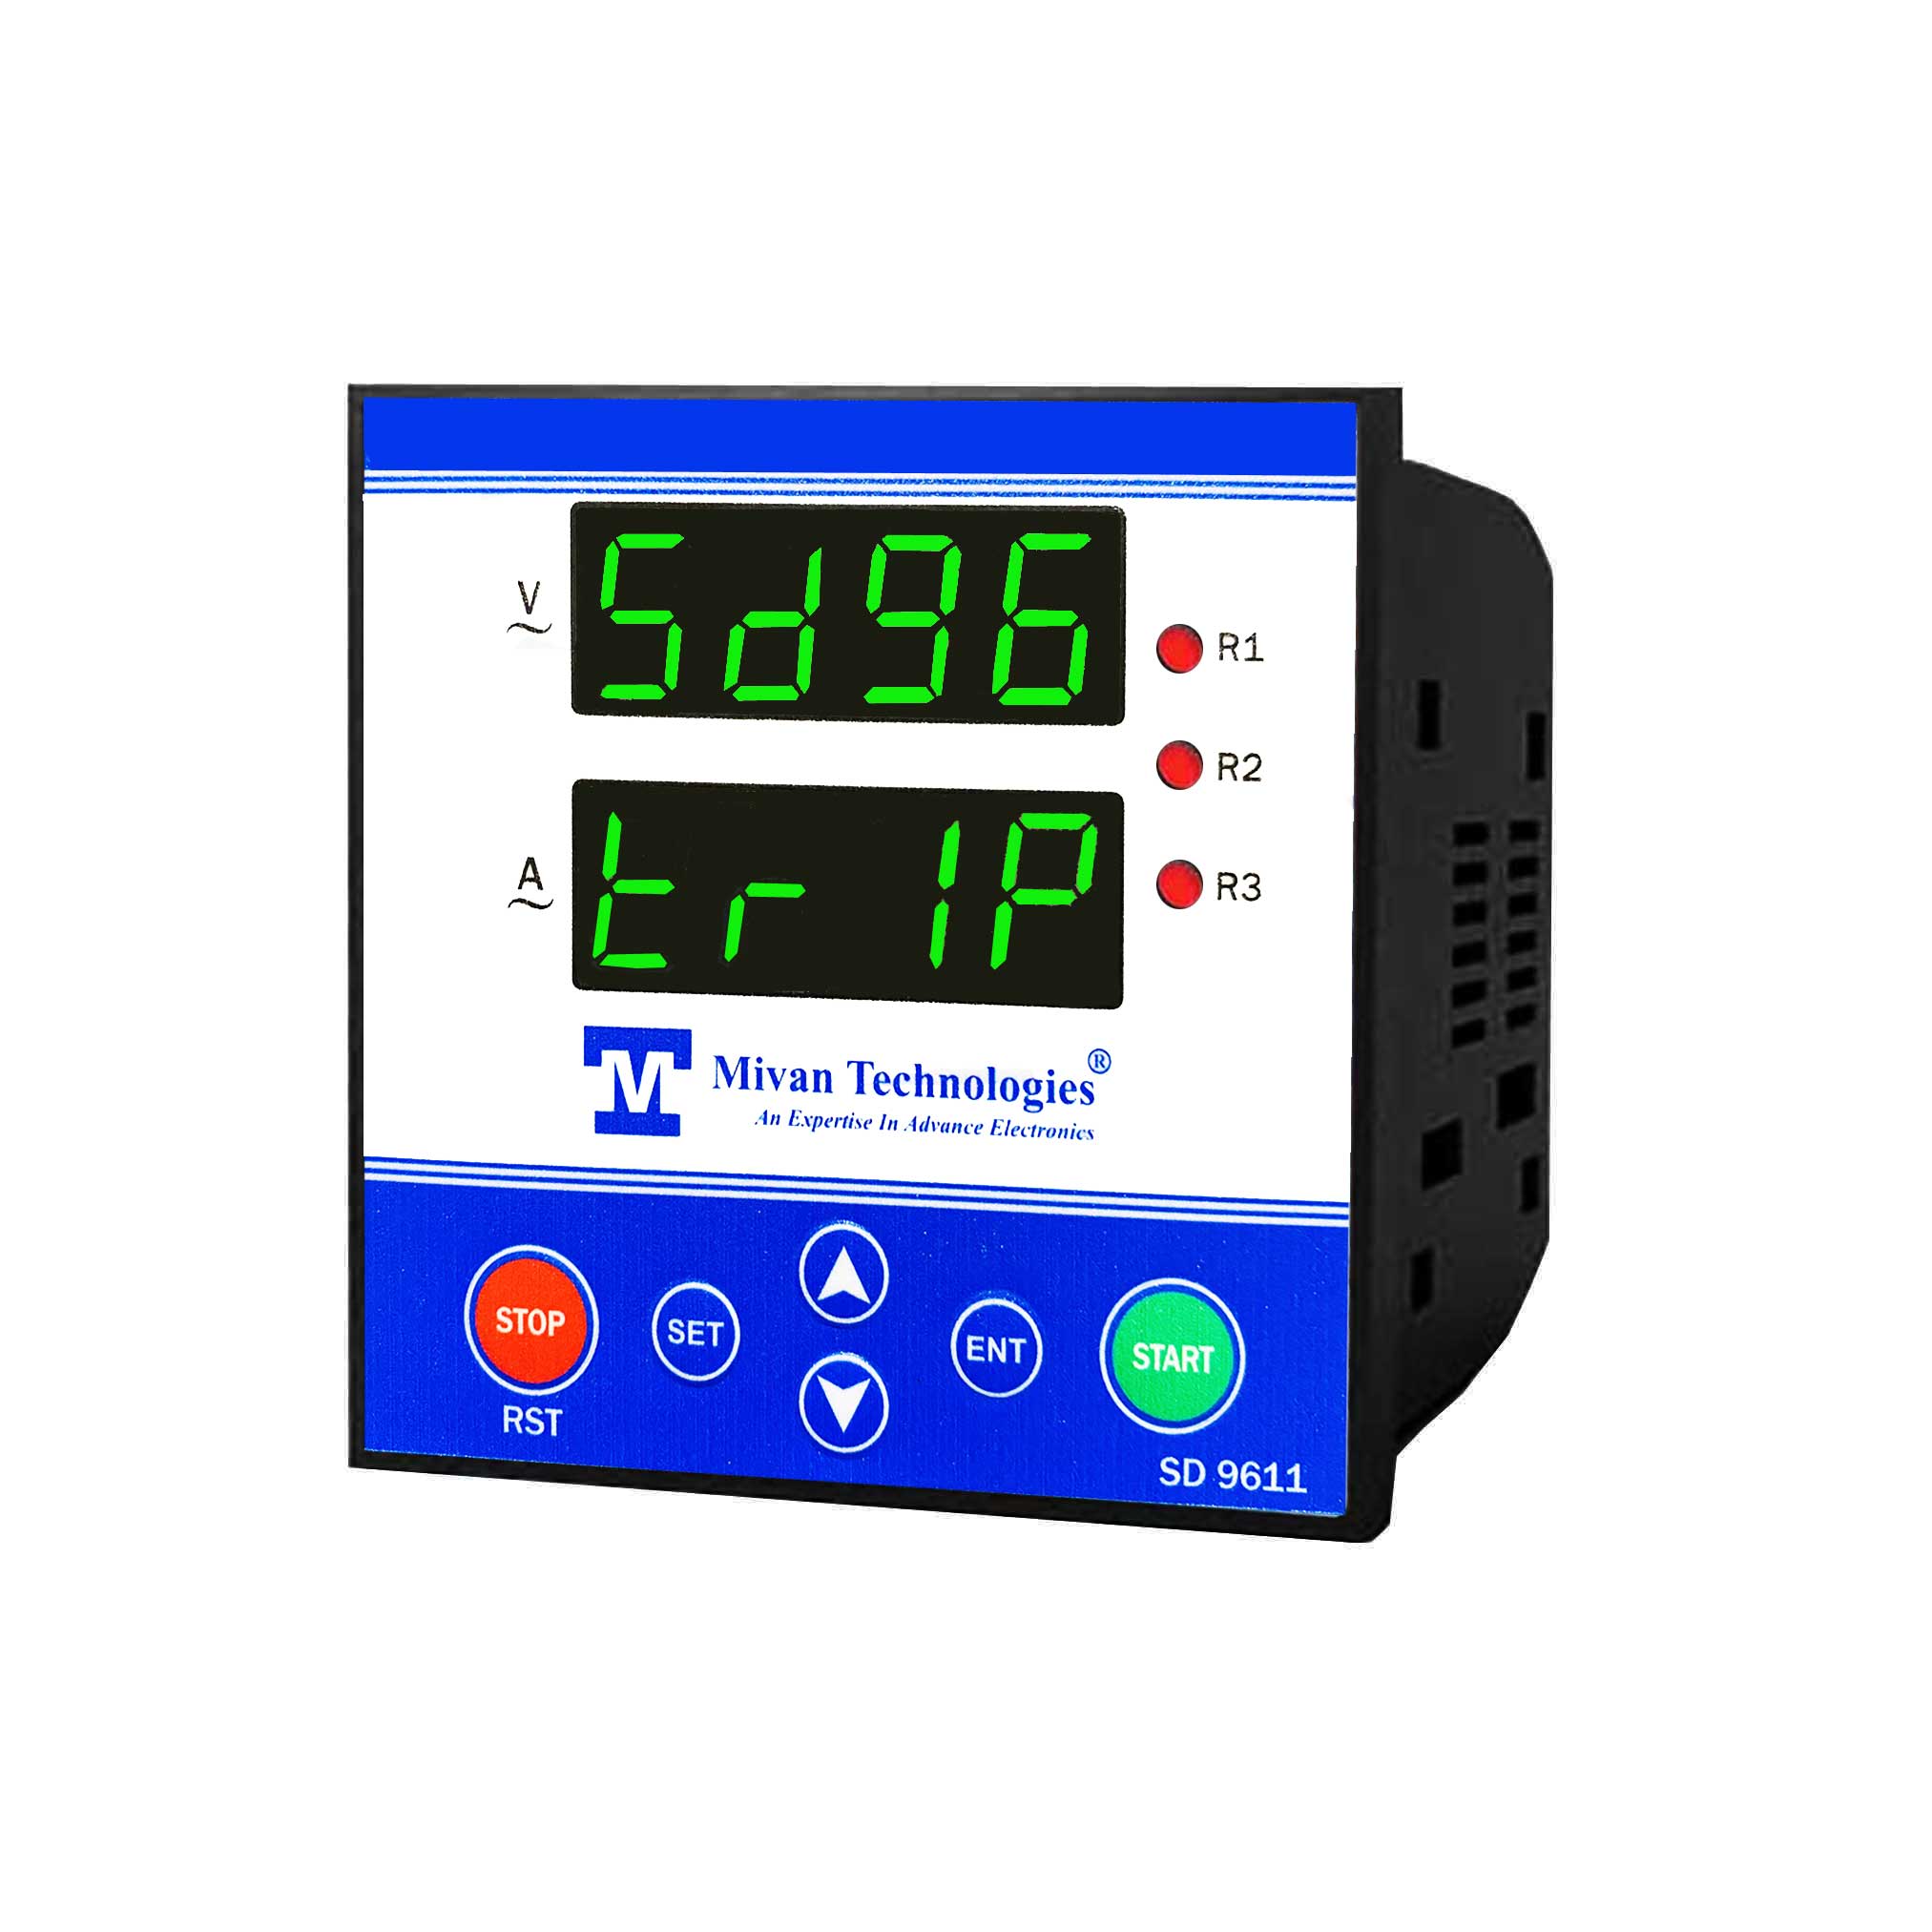 SD 9611 instrument to design any hp Star Delta starter to provide HV LV OL Dry protection with timer spp auto switch